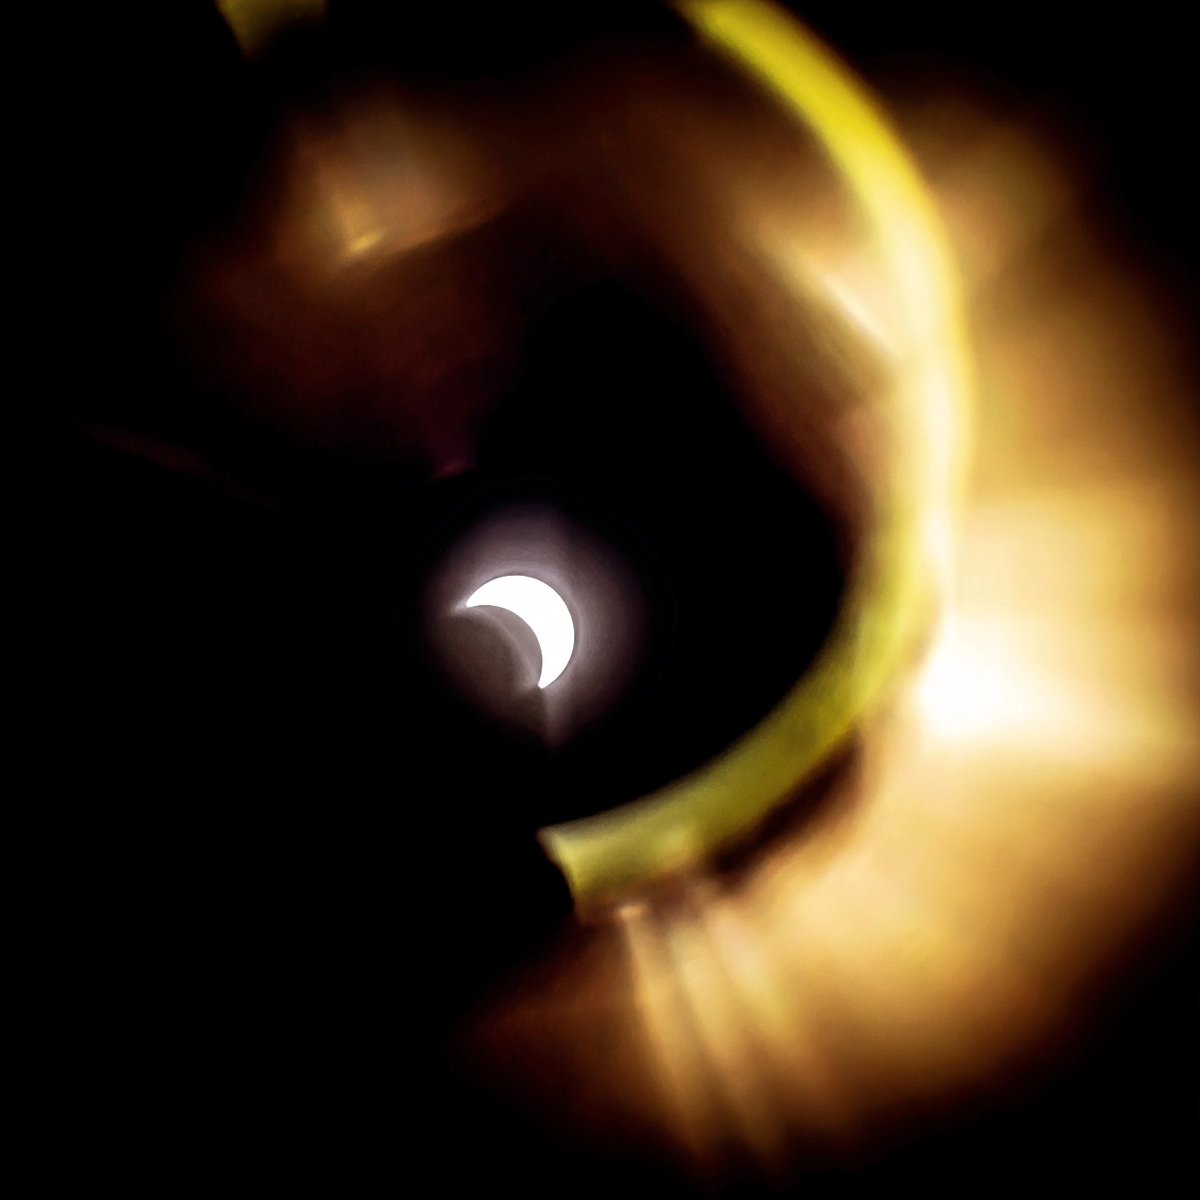 Couldn't make it to the path of totality this time due to a trip coming up in a few days, but caught what I could from CO with two opposing ND filters on a lens they didn't fit on...led to a pretty cool effect!